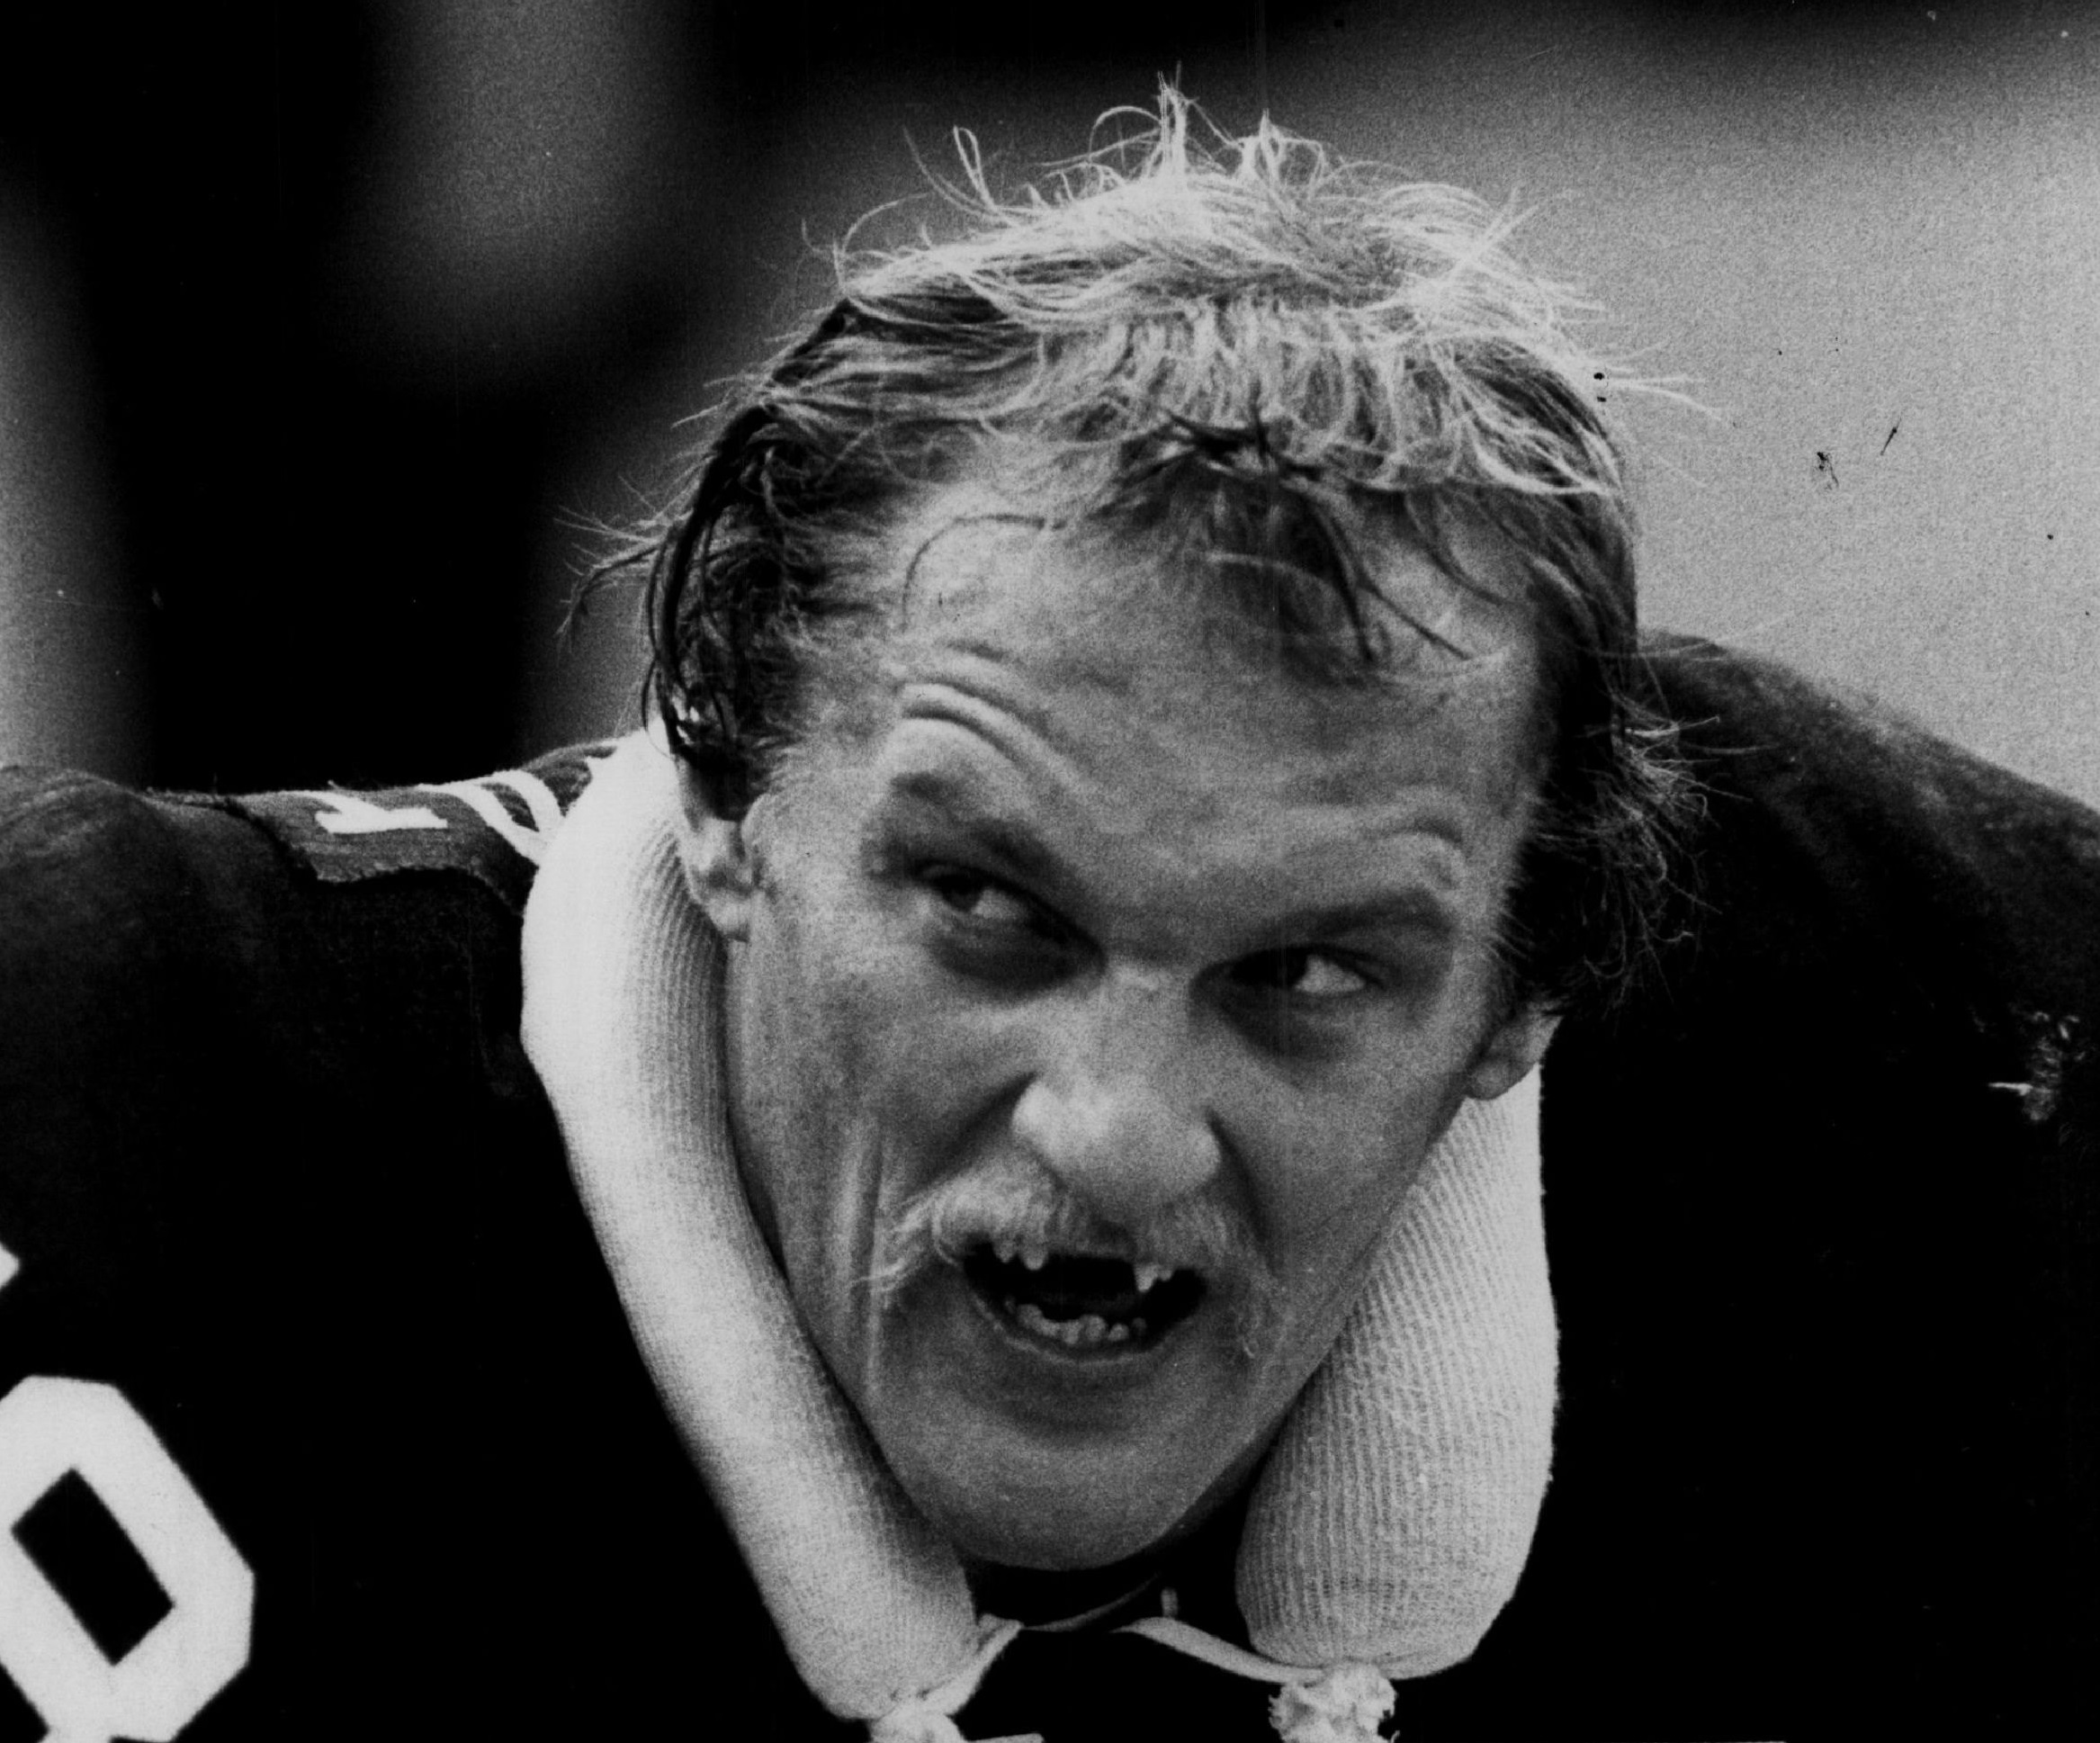 Pittsburgh Steelers linebacker Jack Lambert was an intimidating figure with his trademark scowl. | Sporting News via Getty Images